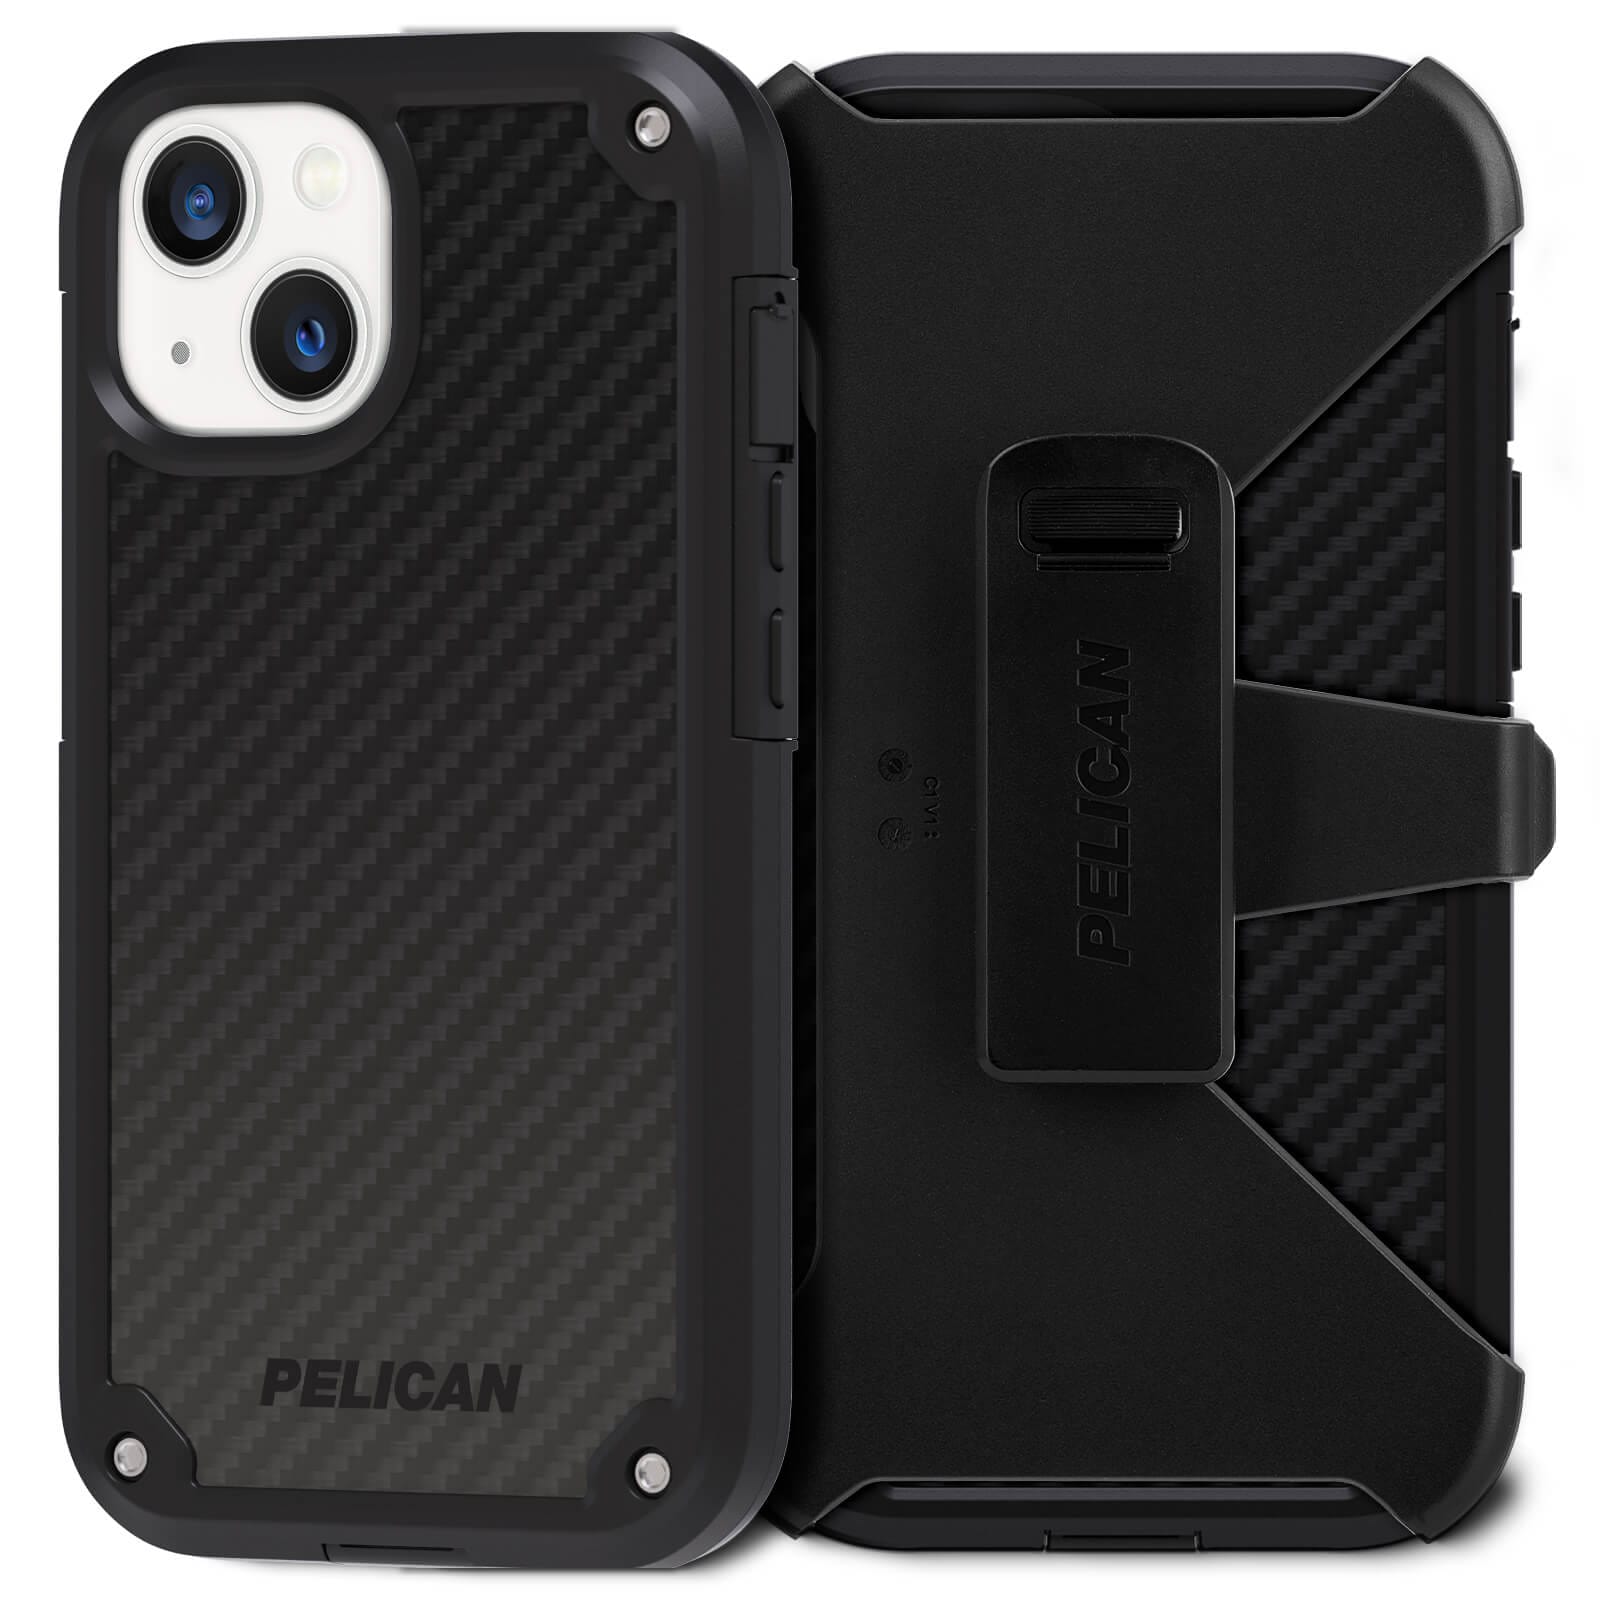 Case comes with holster. color::Black